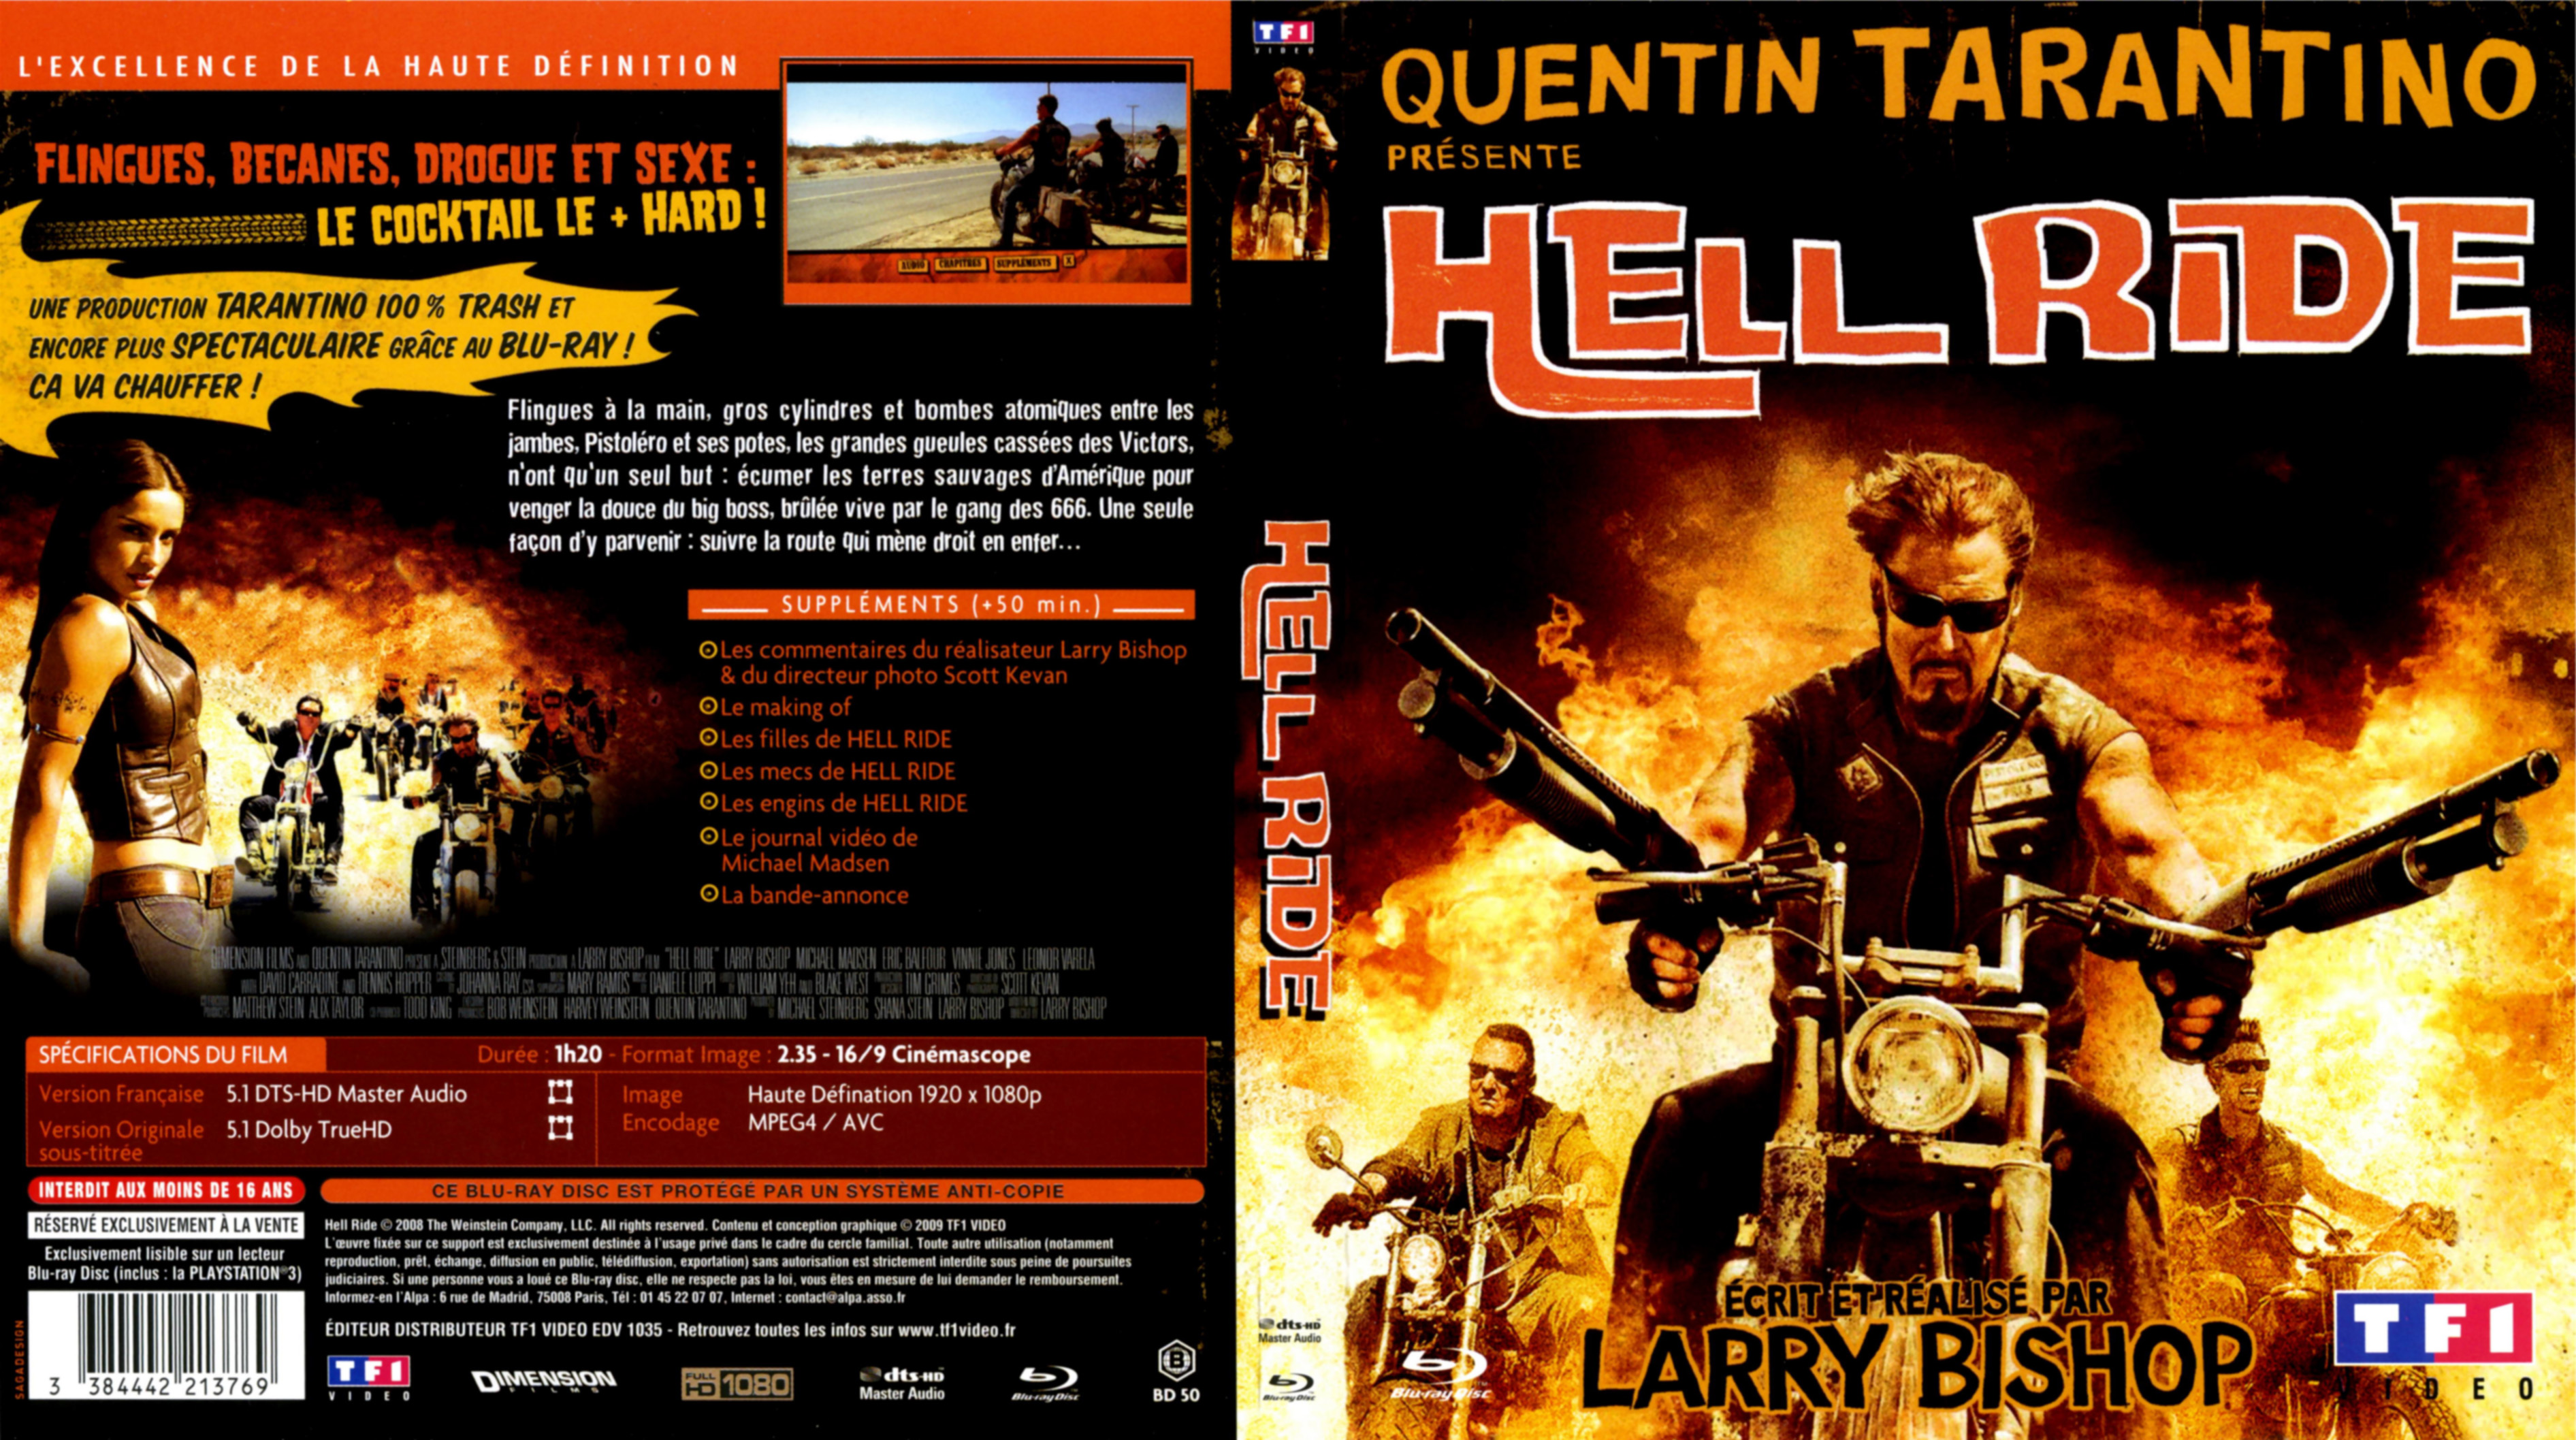 Jaquette DVD Hell ride (BLU-RAY)